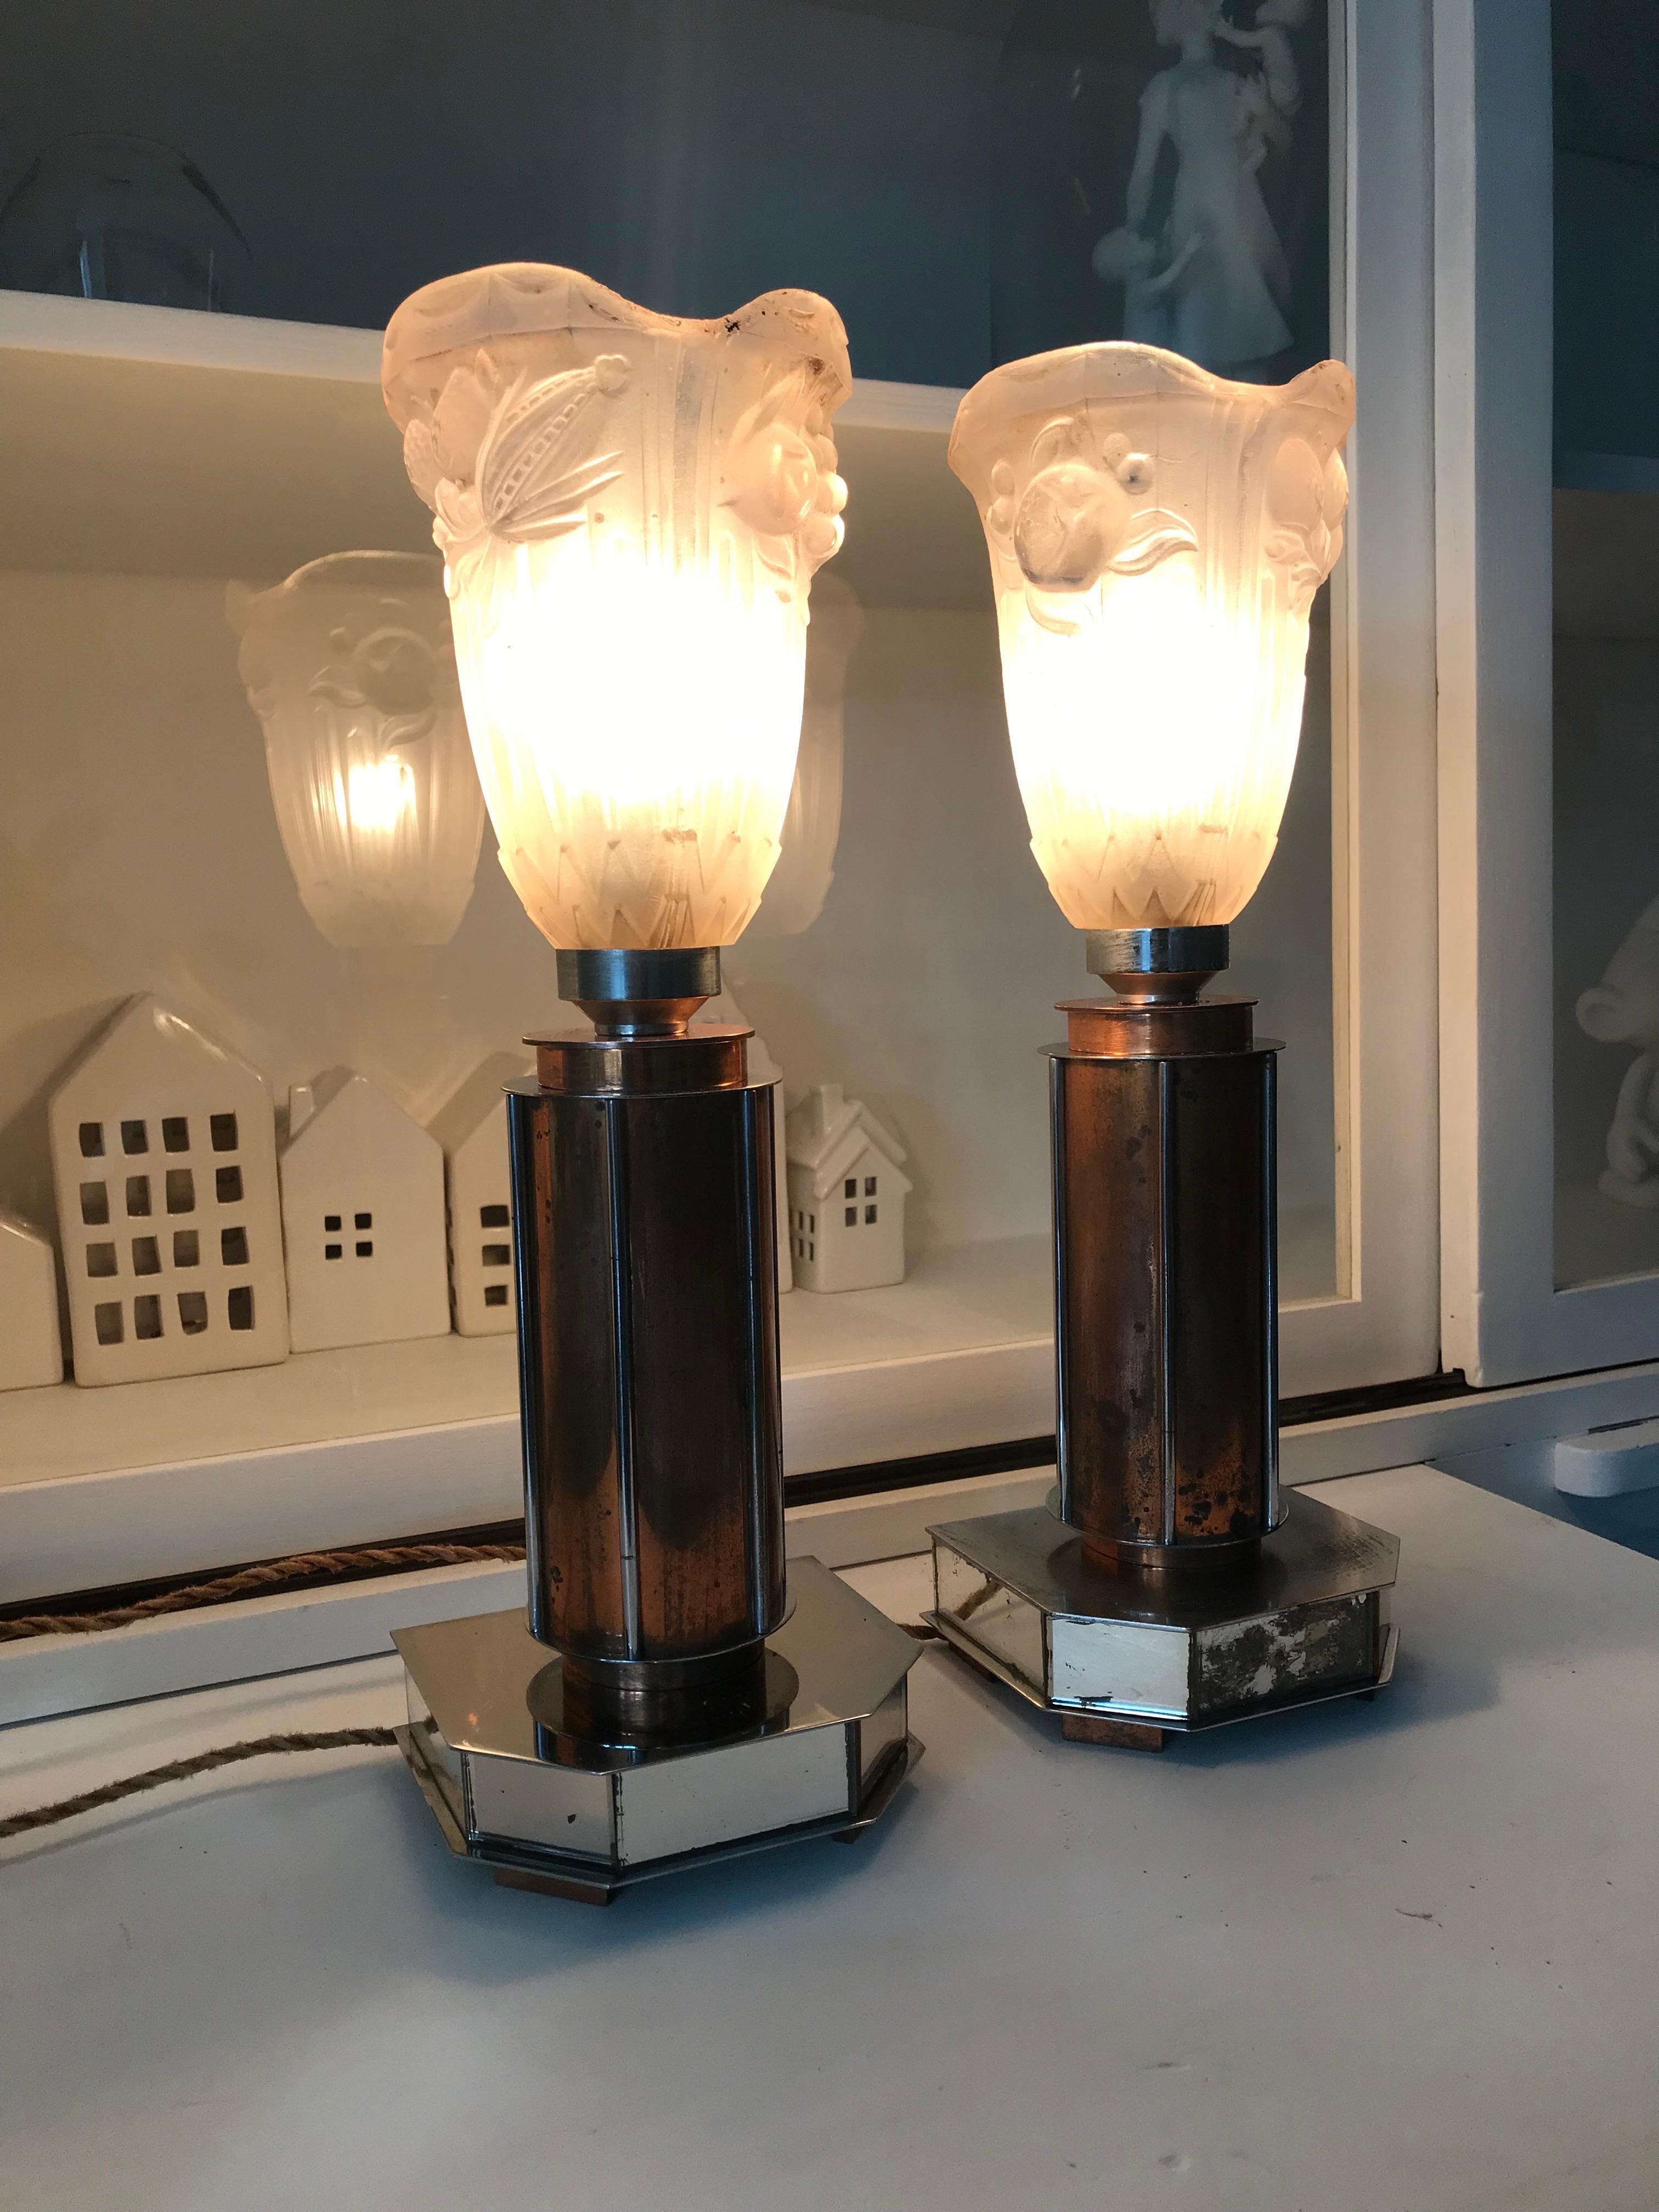 Rare pair of cylindrical design table lamps with glass shades by P. Gilles.

These stylish Art Deco table lamps are built up on geometrical bases with four copper feet. The chromed base comes with small mirror panels on all sides and rising from